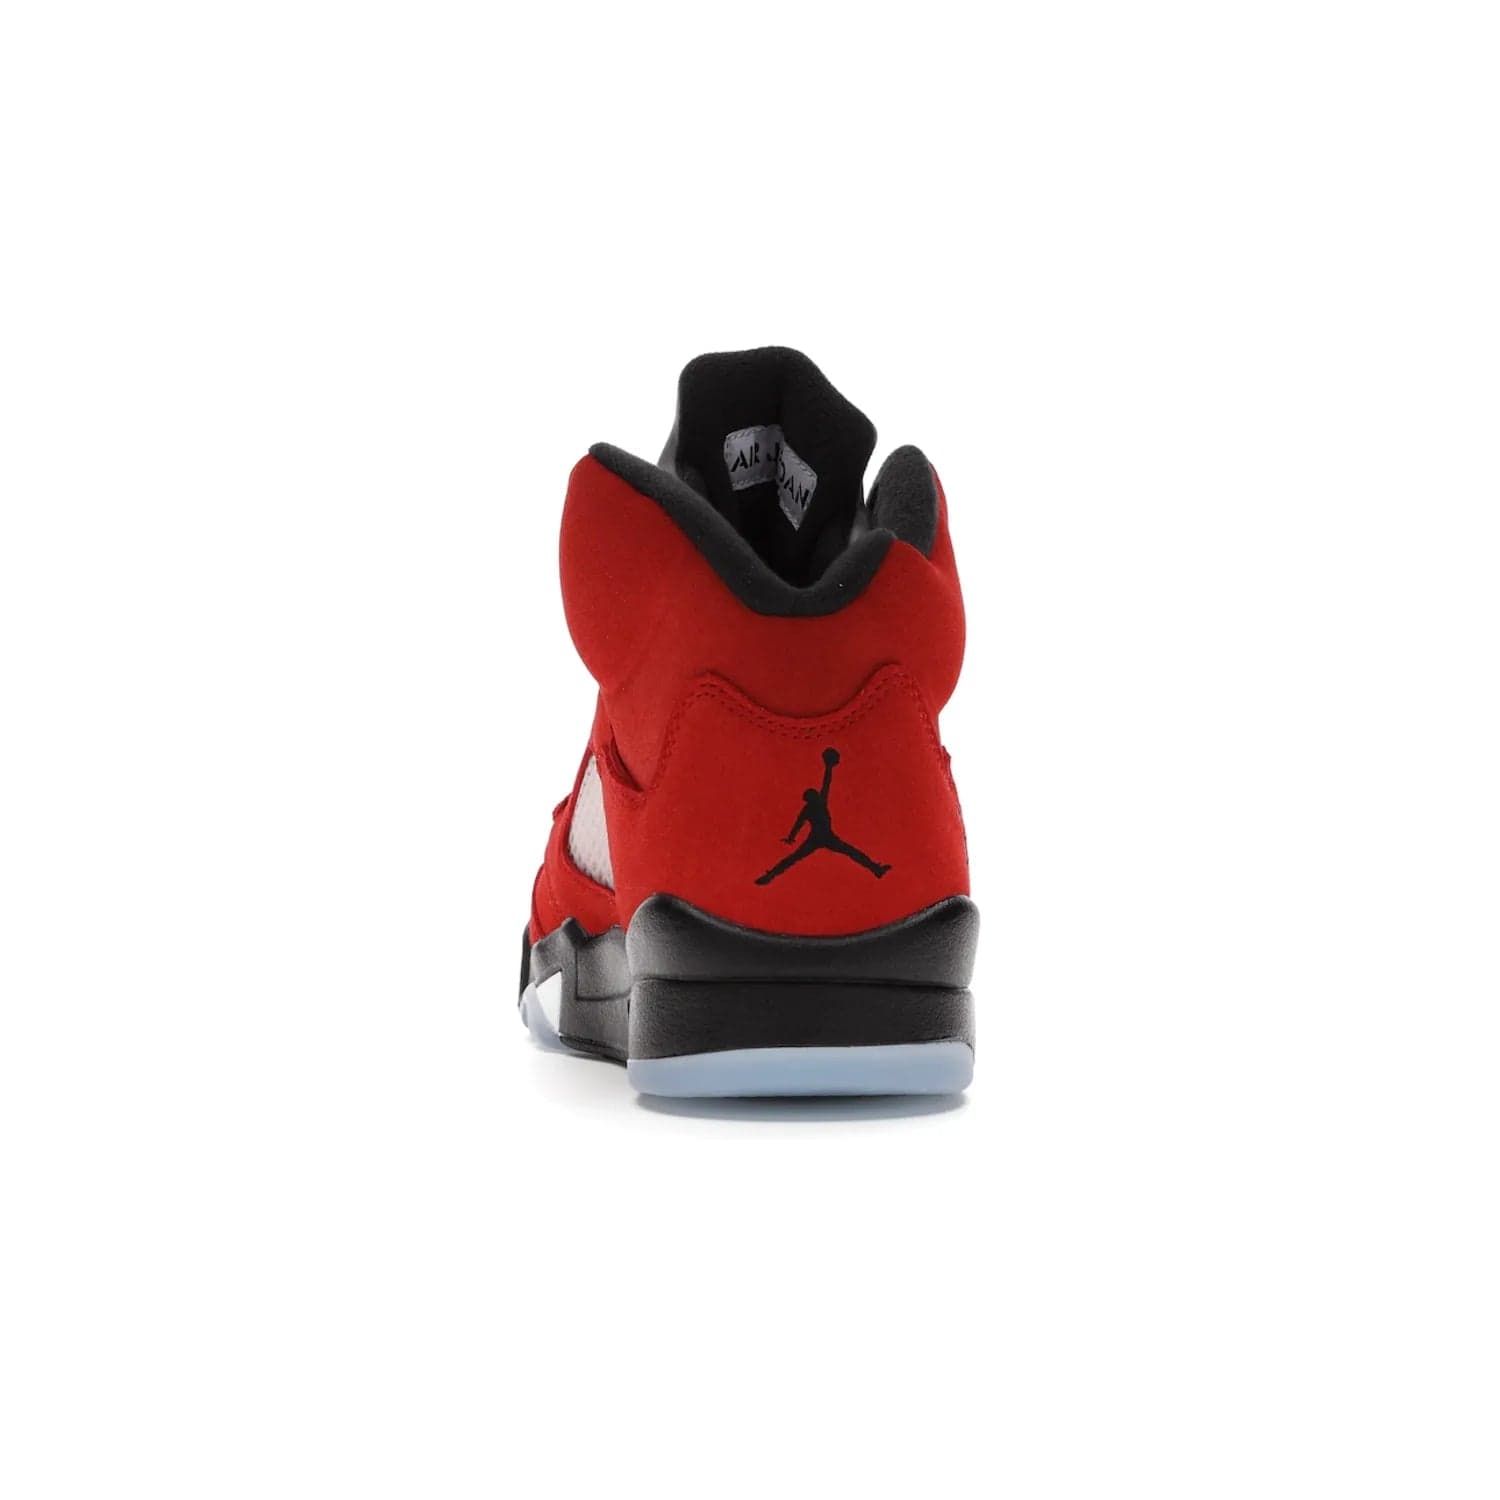 Jordan 5 Retro Raging Bull Red (2021) - Image 27 - Only at www.BallersClubKickz.com - Get ready for the 2021 stand-alone release of the Air Jordan 5 Raging Bulls! This all-suede upper combines luxe details like a Jumpman logo, red & black "23" embroidery and shark tooth detailing, atop a black midsole. Don't miss out - release date in April 2021 for $190.